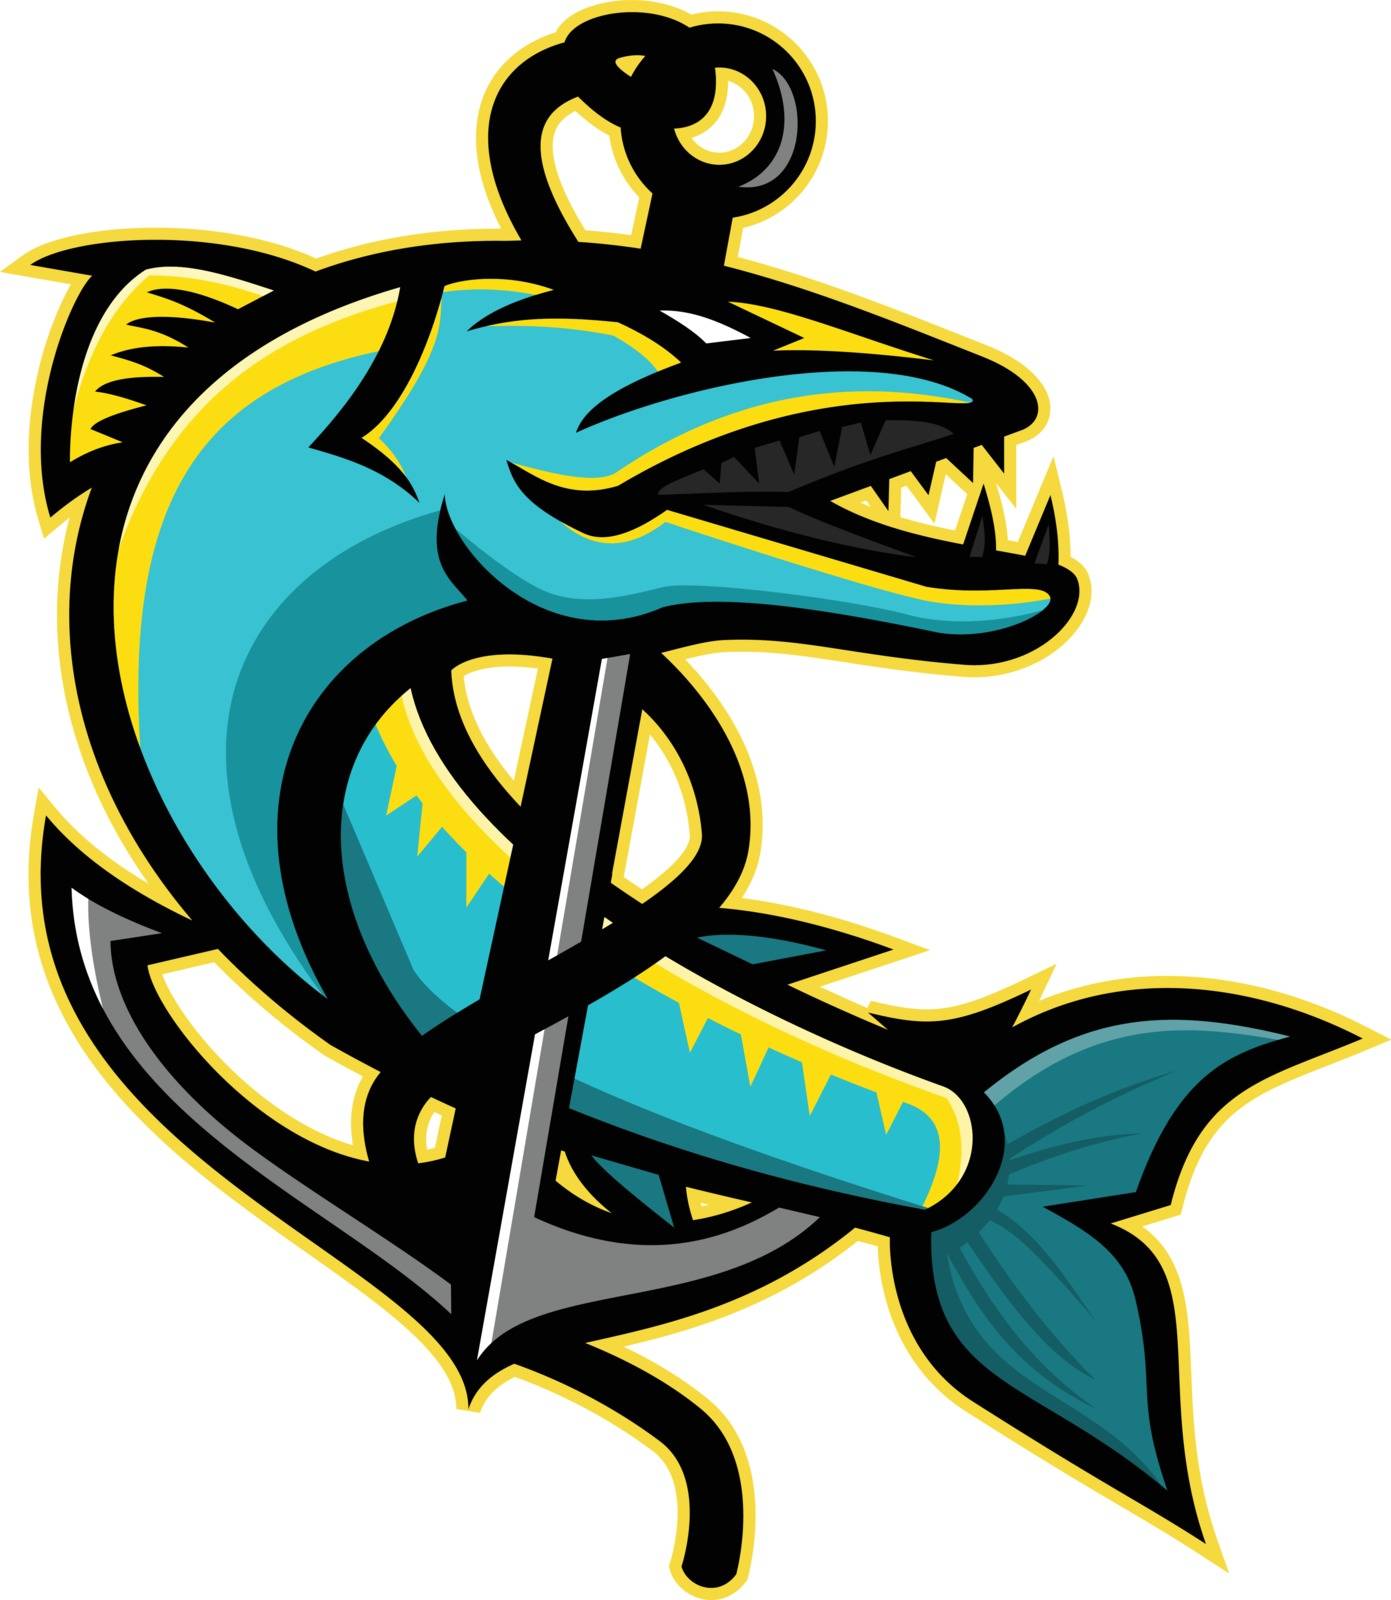 Mascot icon illustration of a great barracuda, a saltwater fish that is snake-like with fearsome appearance and ferocious behaviour, coiling up an anchor on isolated background in retro style.